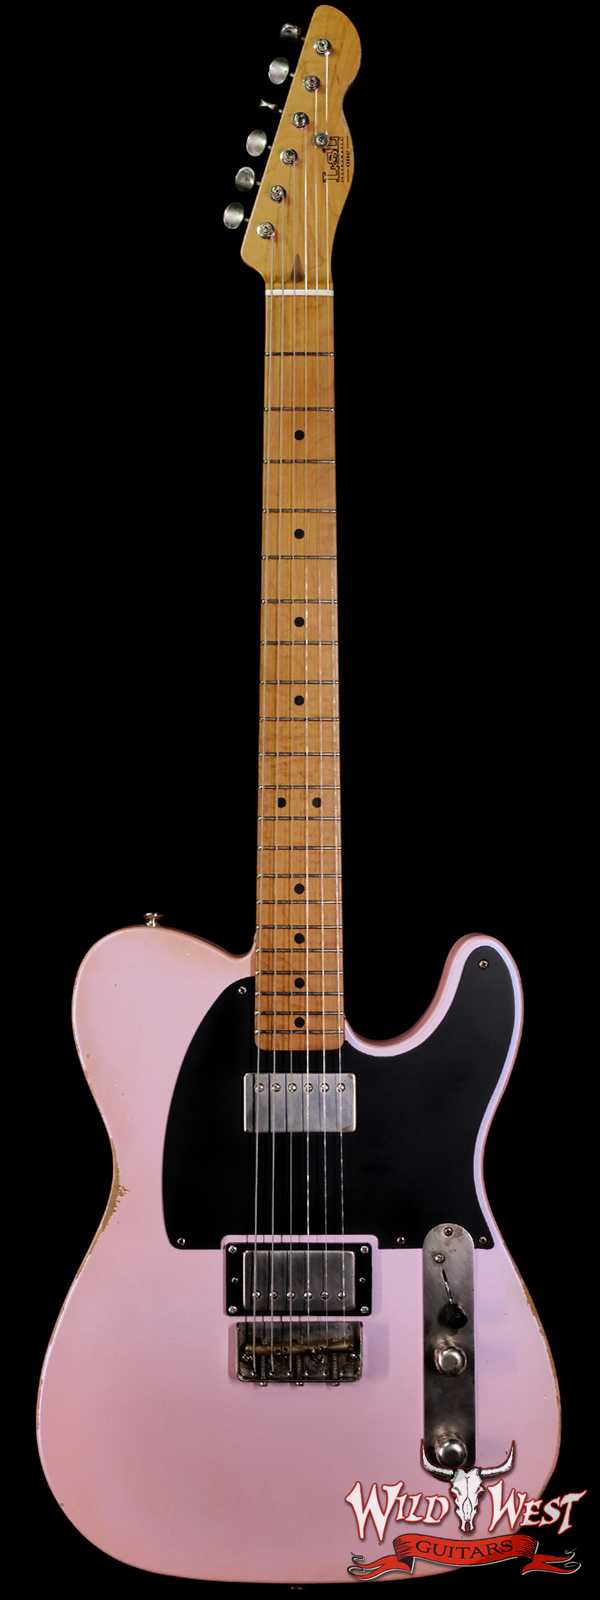 LsL T-Bone One Alder Body Roasted Flame Maple Neck Double Humbucker HH Medium Aging Ice Pink(Limited Color)